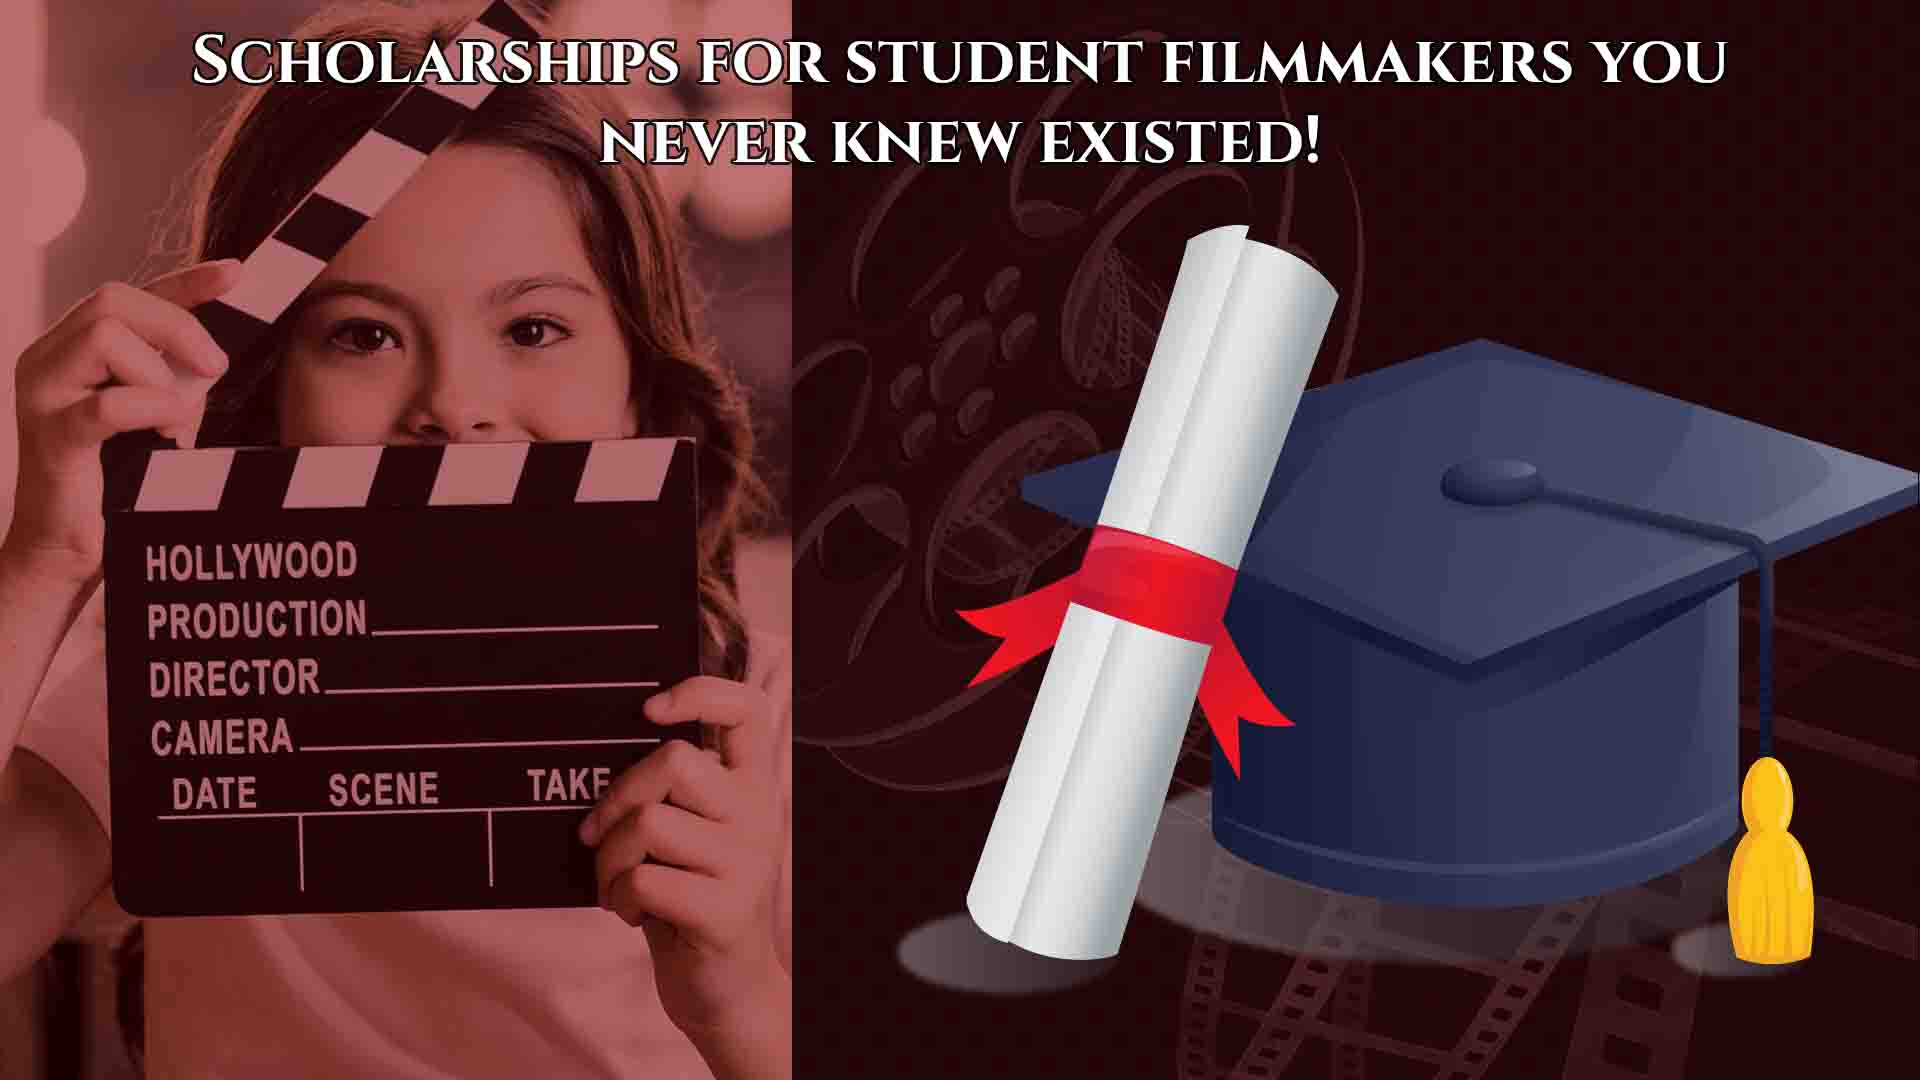 Scholarships for student filmmakers you never knew existed!